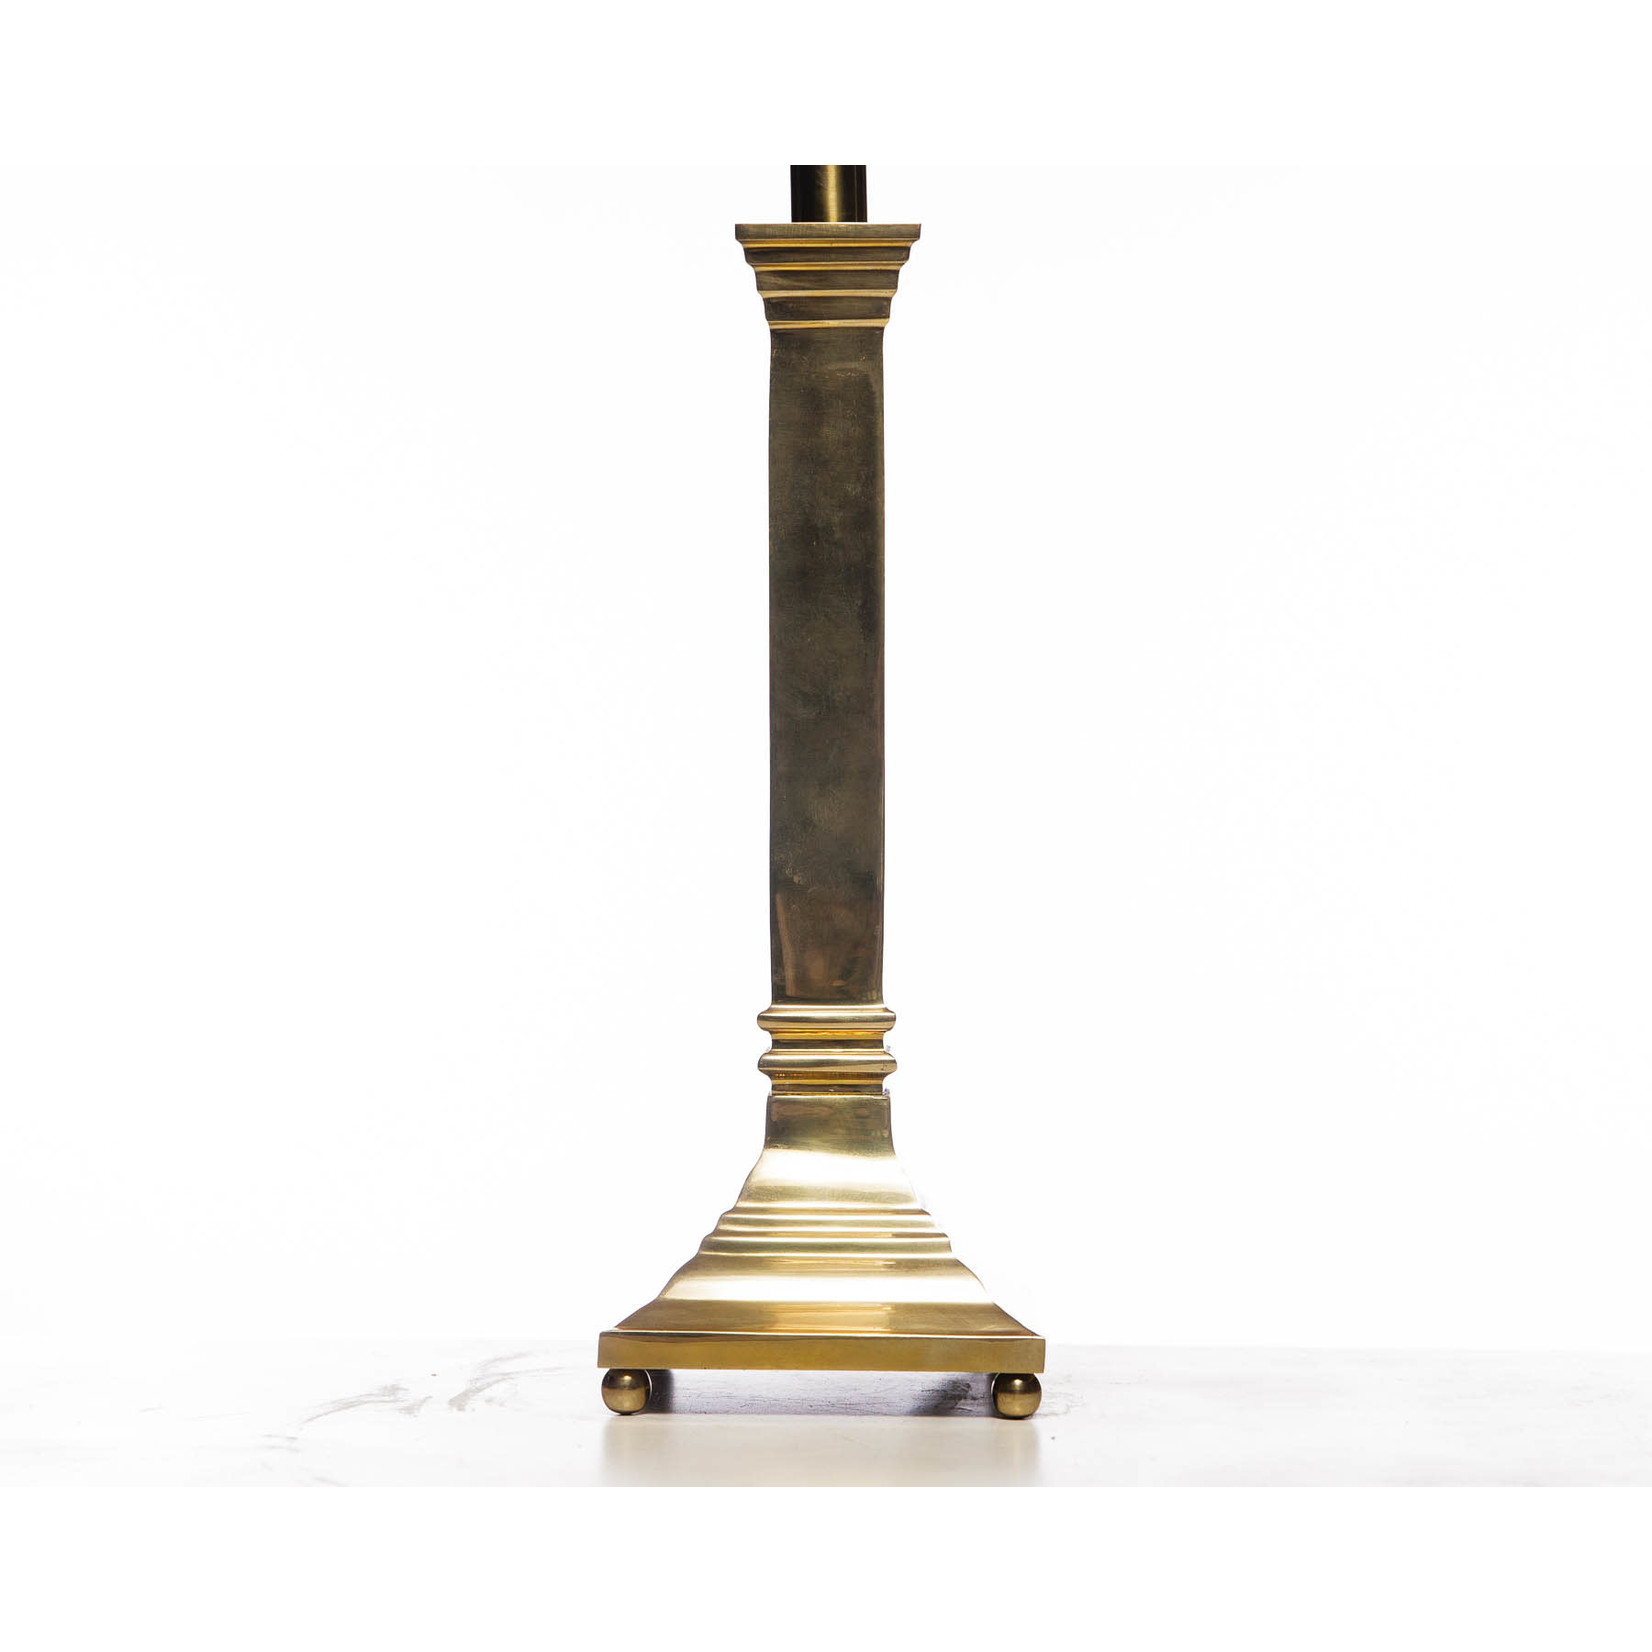 Lawrence & Scott Square Base Polished Solid Brass Candlestick Table Lamp